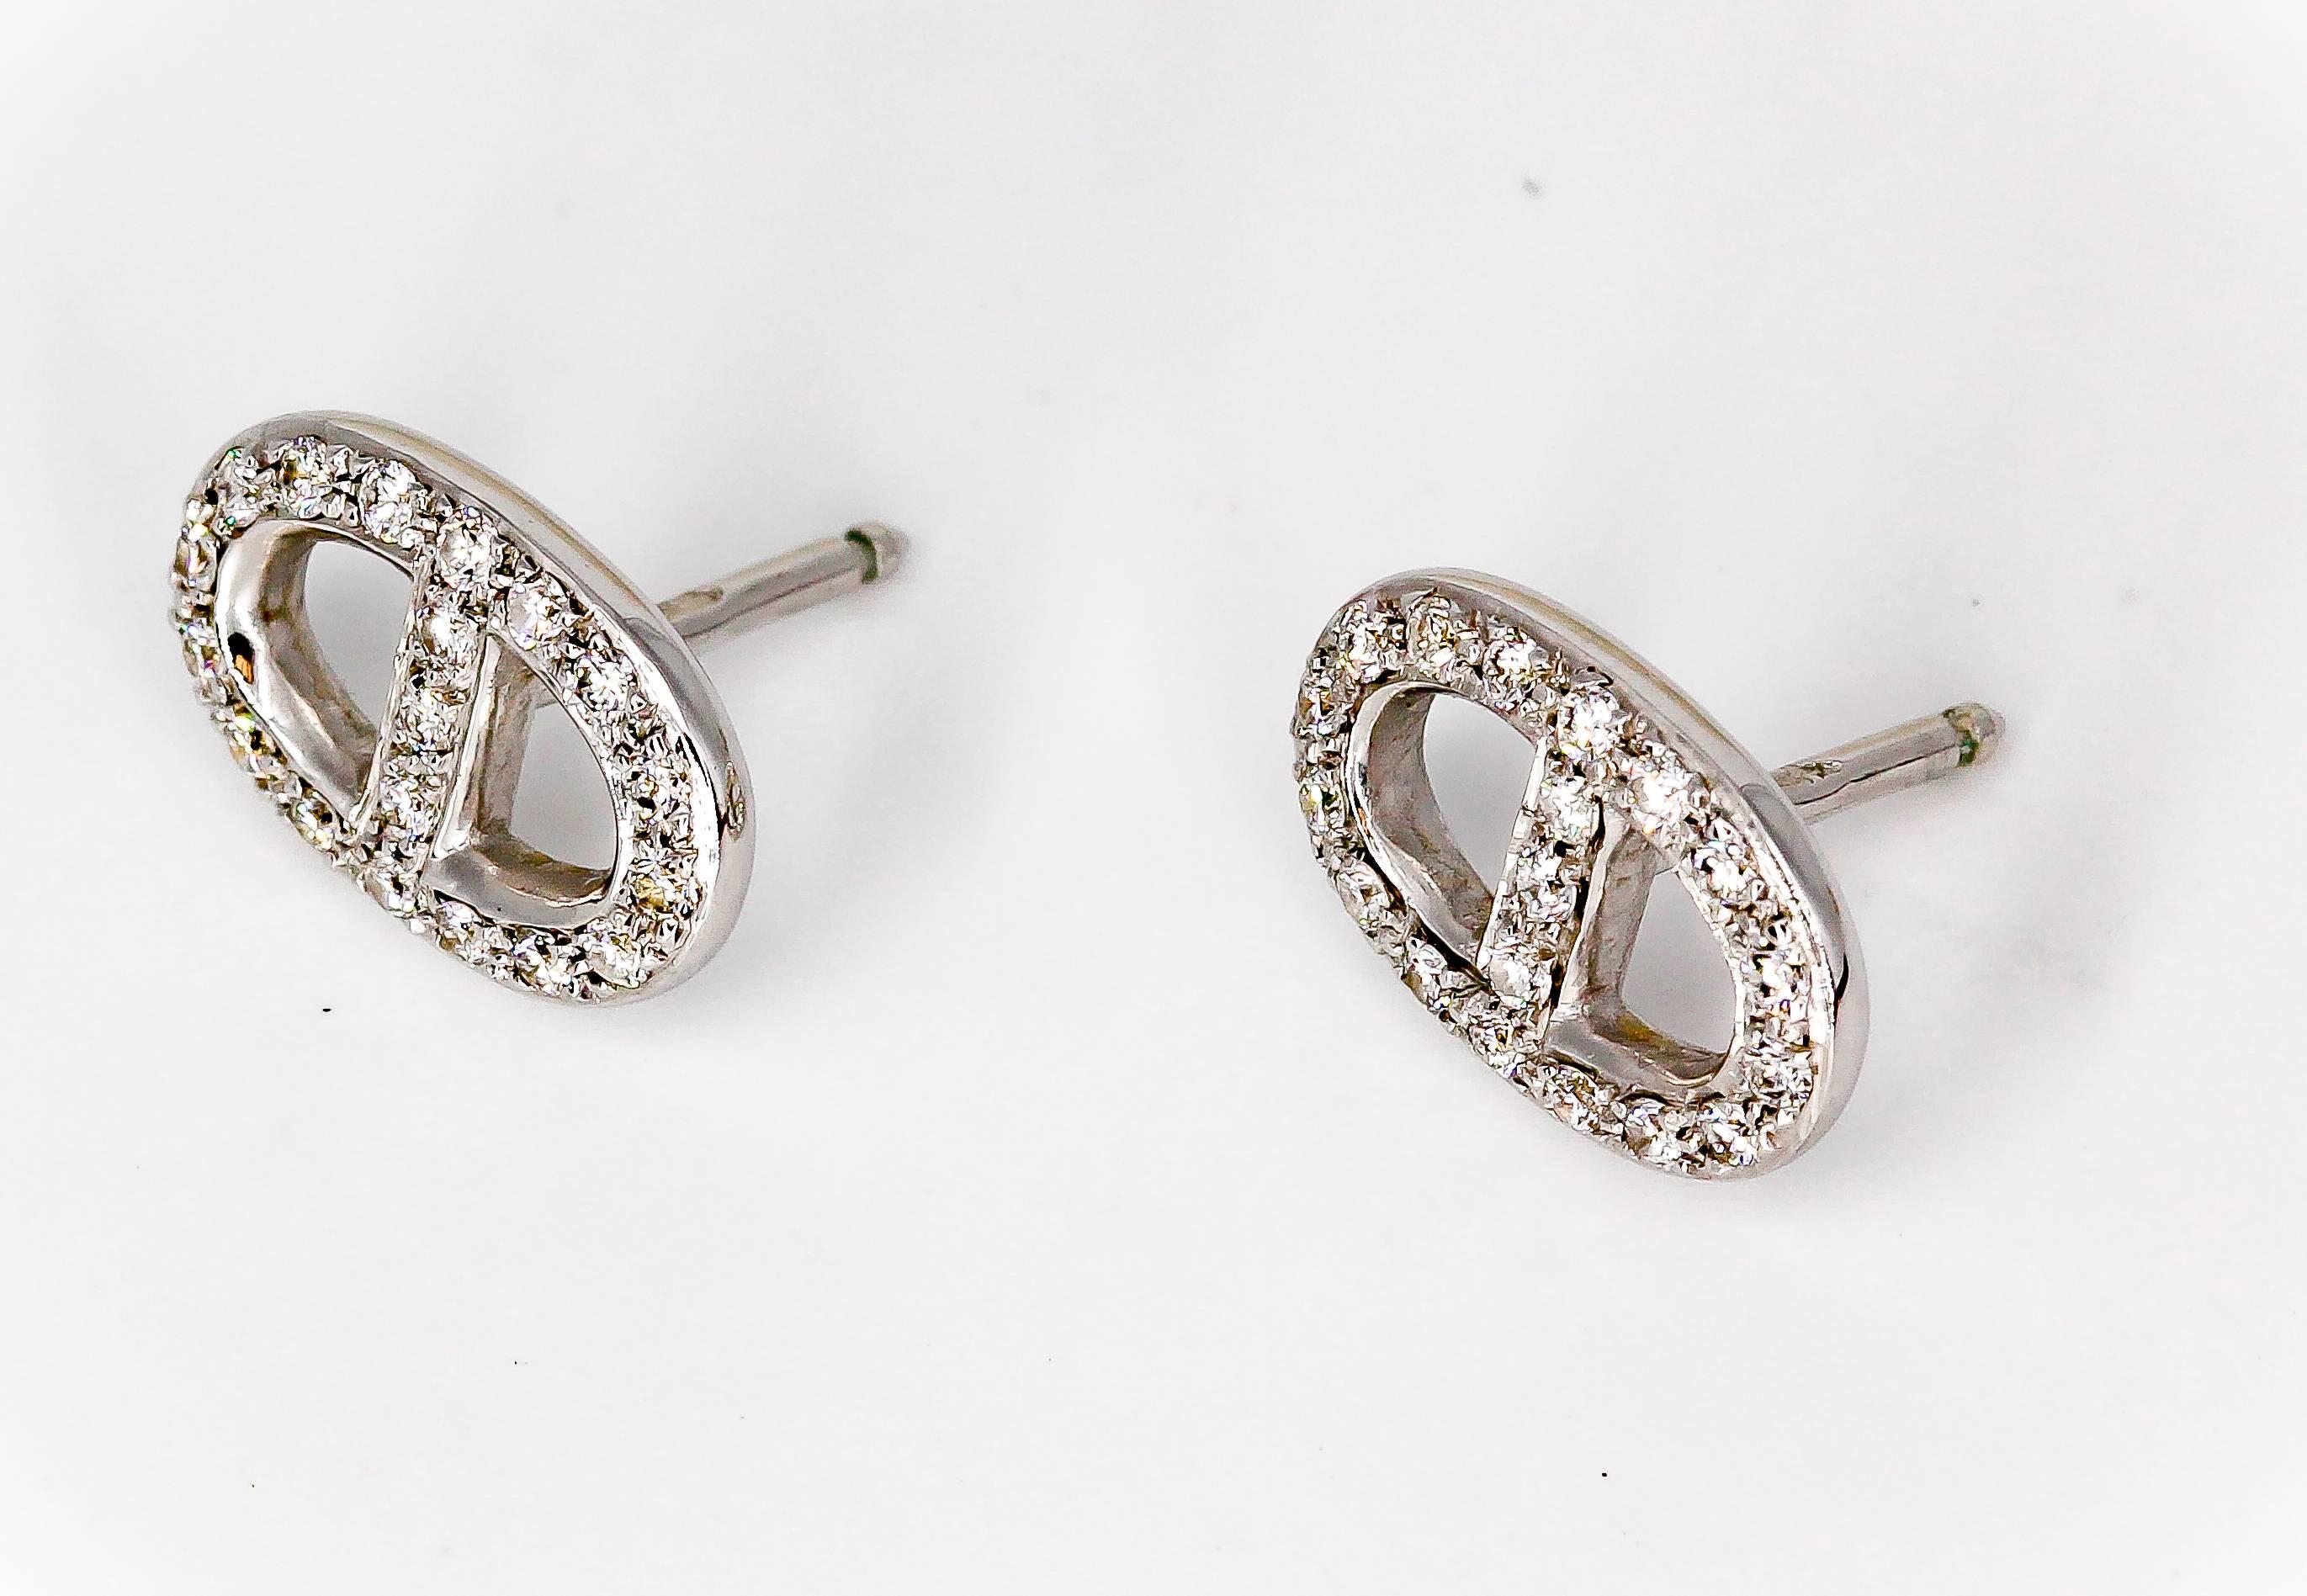 Elegant diamond and 18K white gold earrings from the "Chaine D'Ancre" collection by Hermes. They feature high grade round brilliant cut diamonds throughout.

Hallmarks: Hermes, Au750, reference numbers, French gold assay mark, maker's mark.